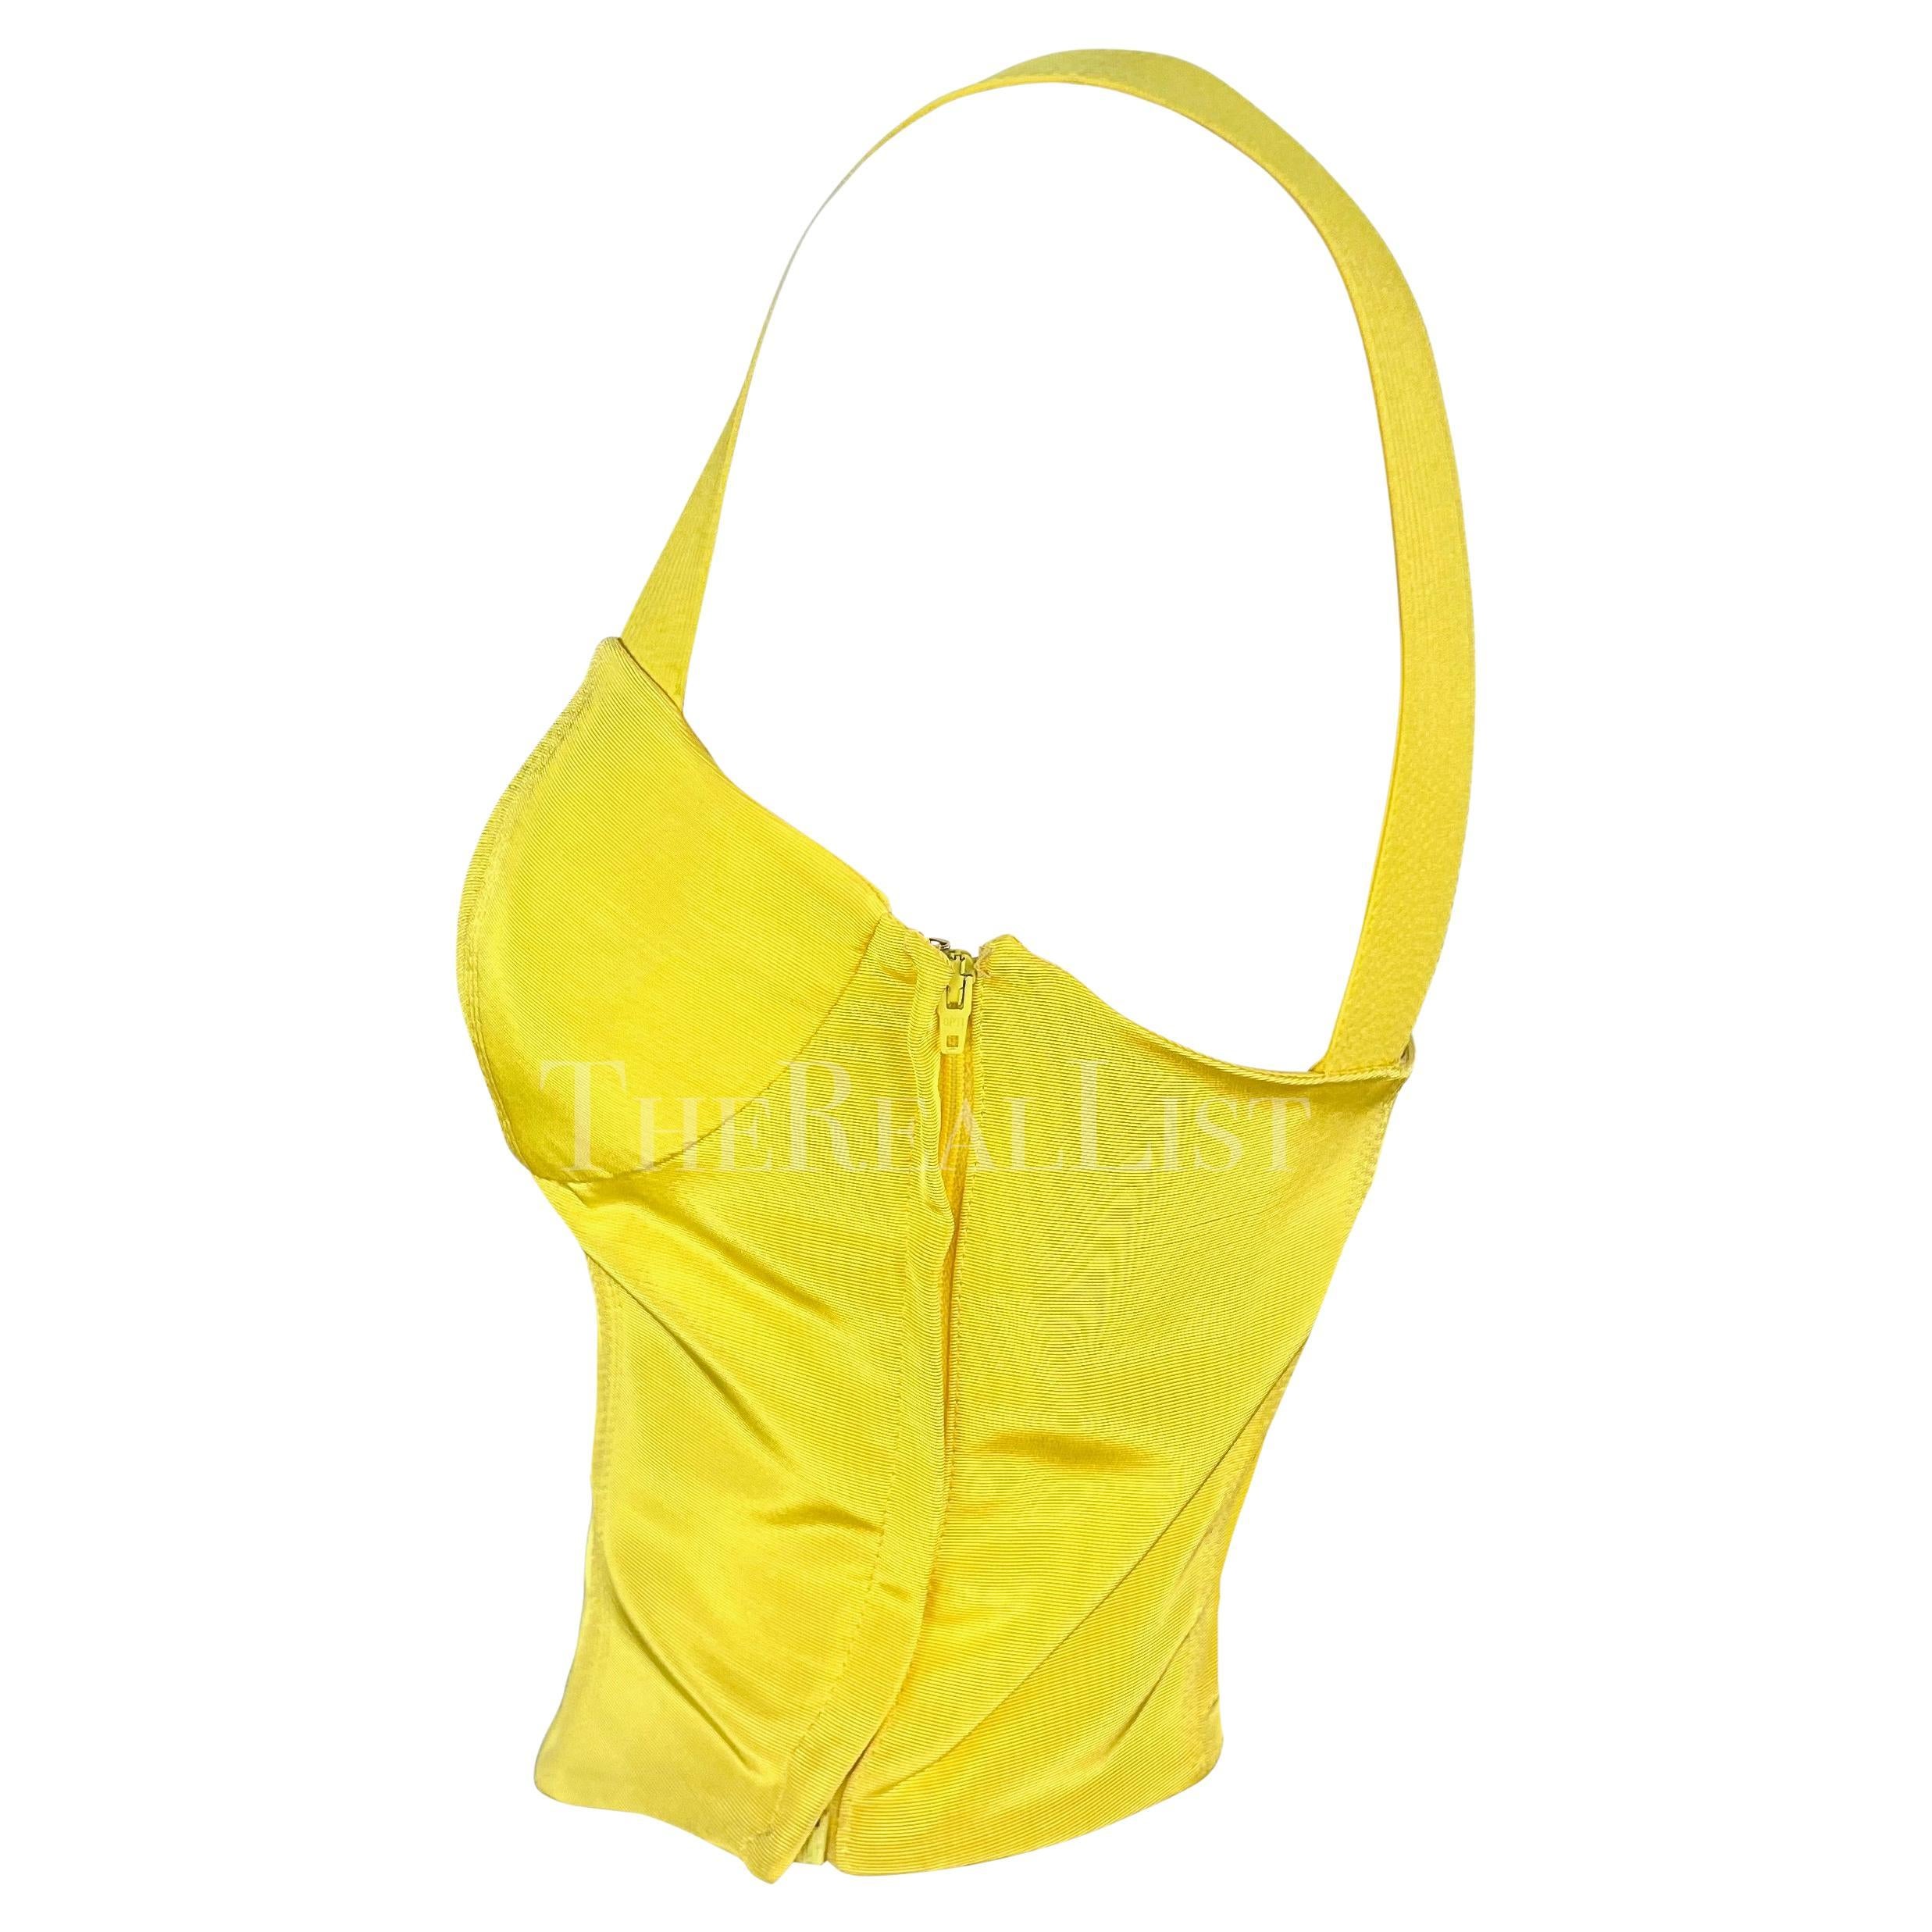 S/S 1992 Gianni Versace Canary Yellow Bustier Crop Top In Excellent Condition For Sale In West Hollywood, CA